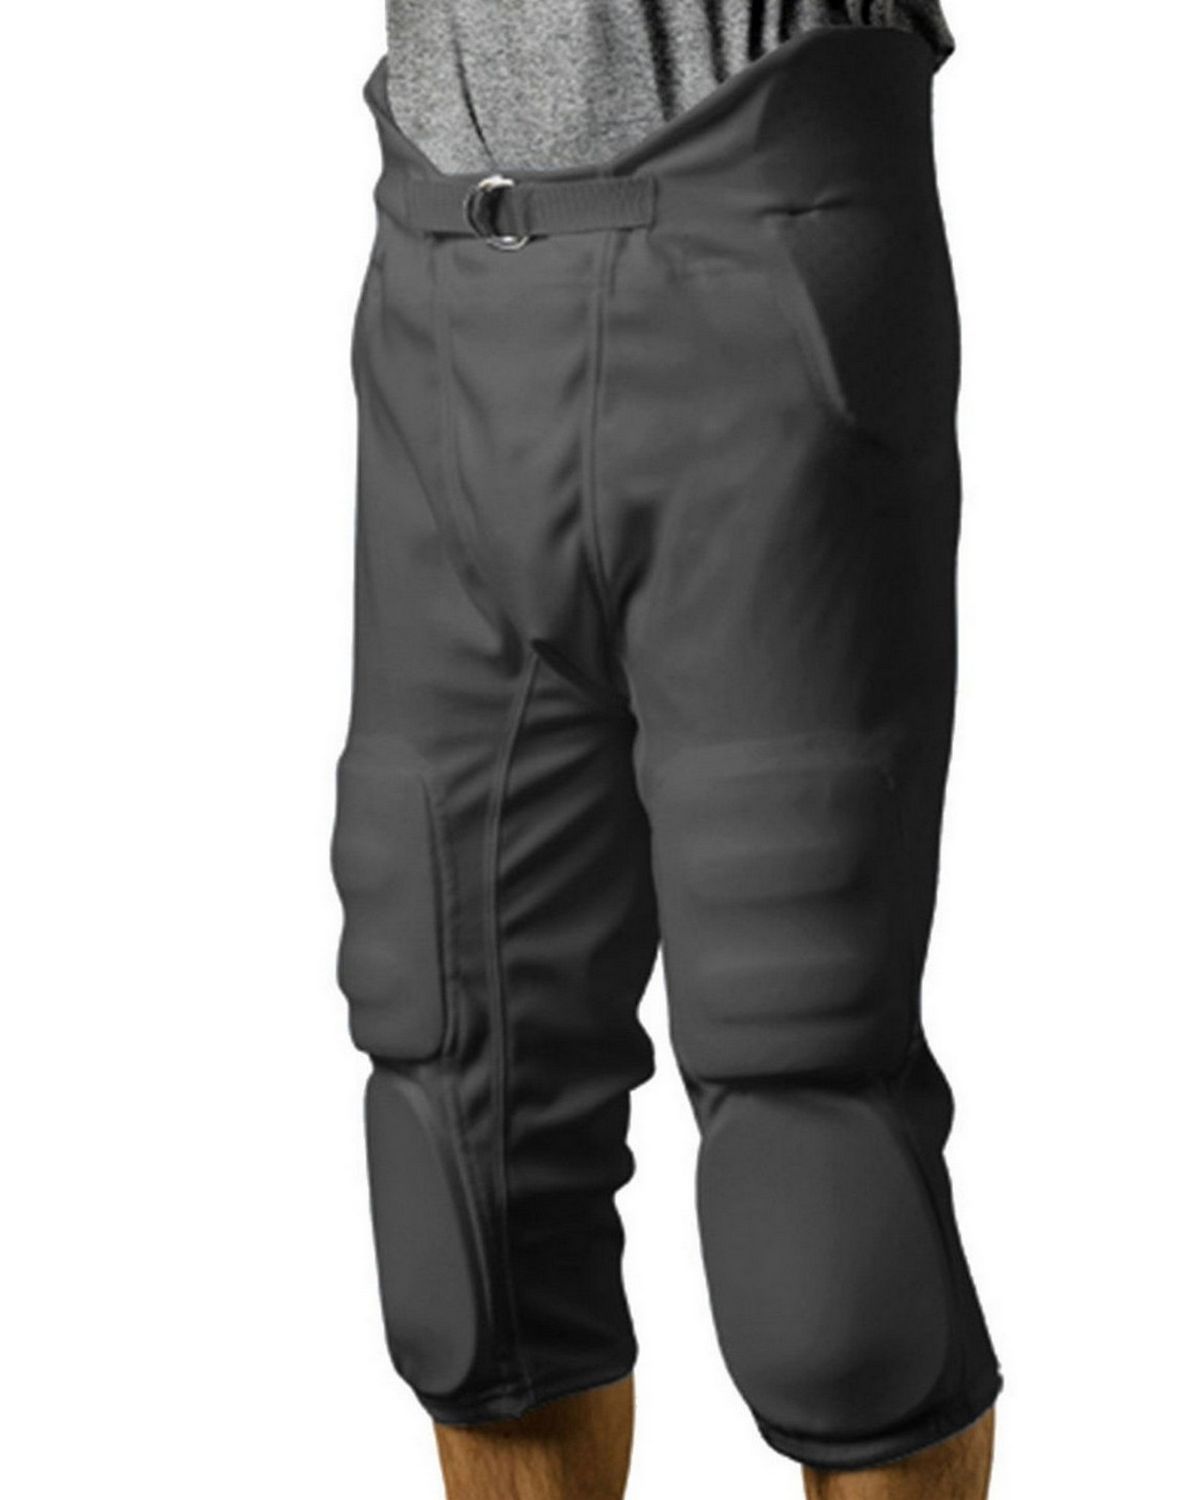 A4 NB6180 Youth Flyless Integrated Football Pant